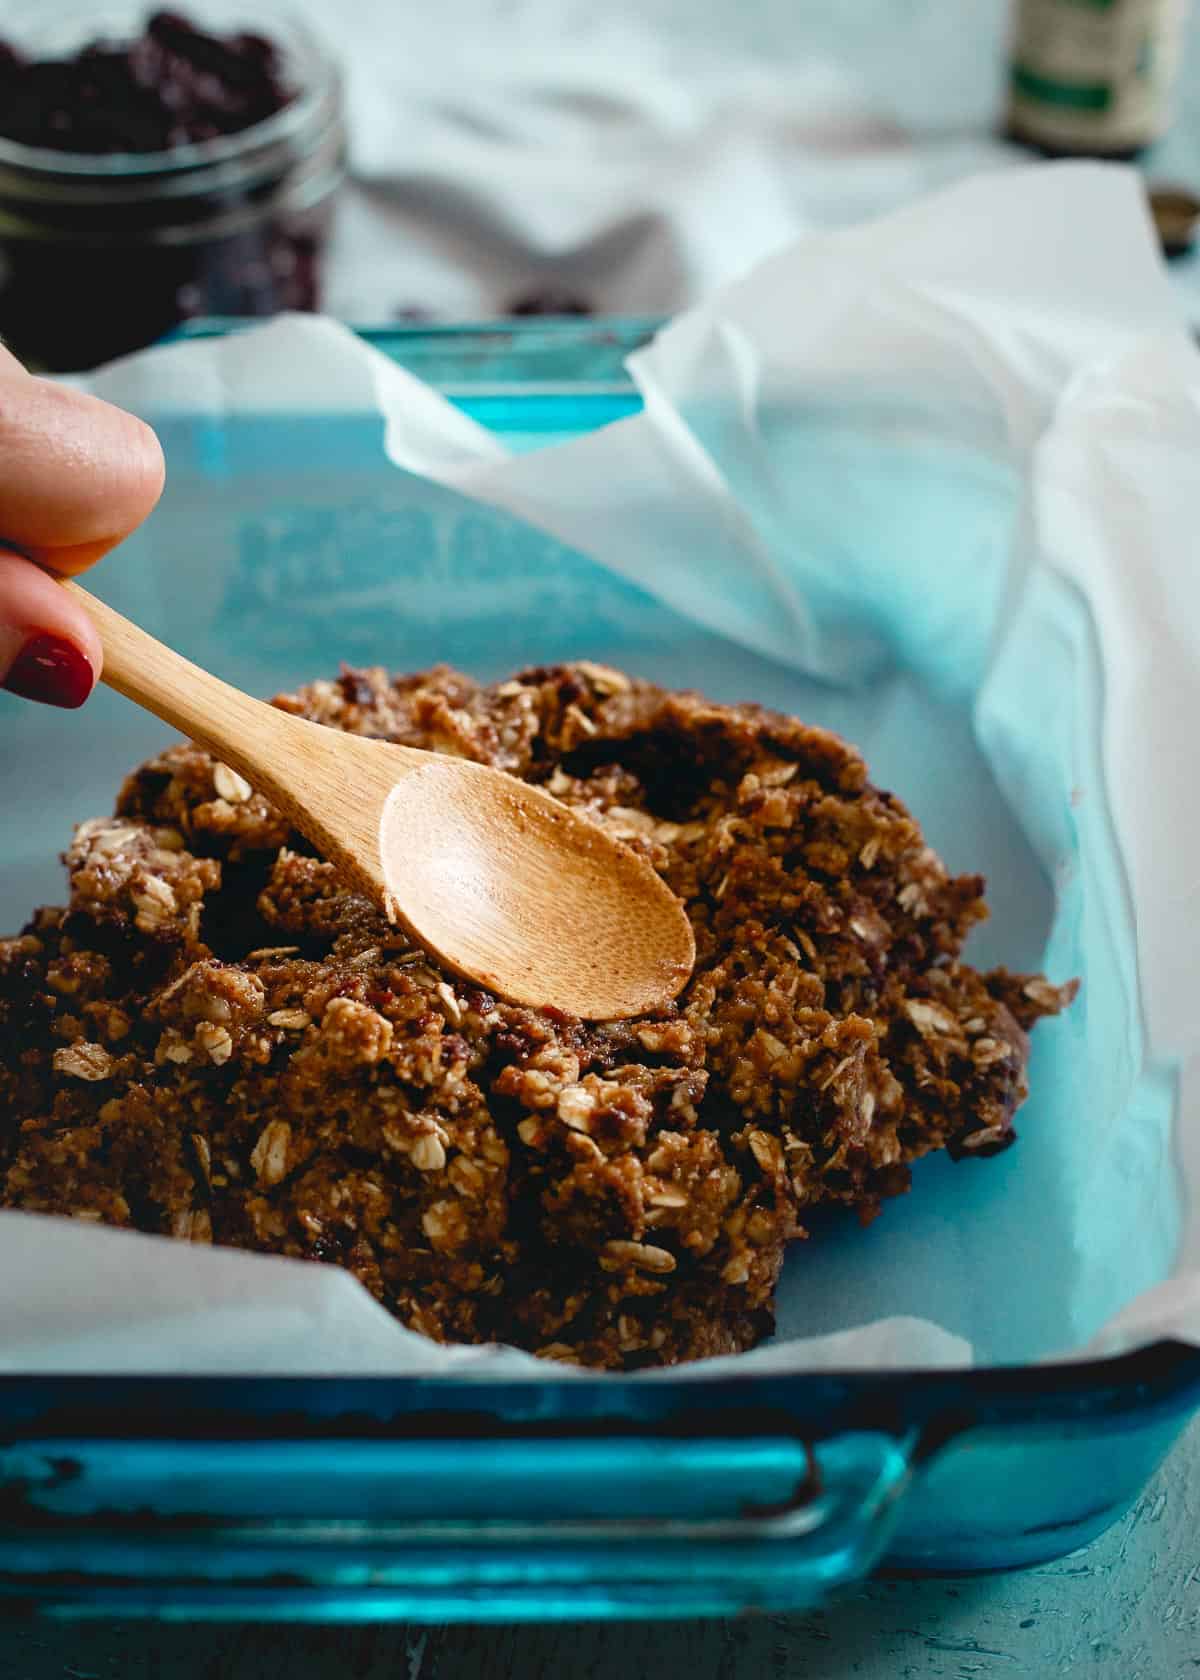 Made with oats, tart cherries, dates and nuts, these granola bars are baked to chewy perfection and perfect for a healthy snack.